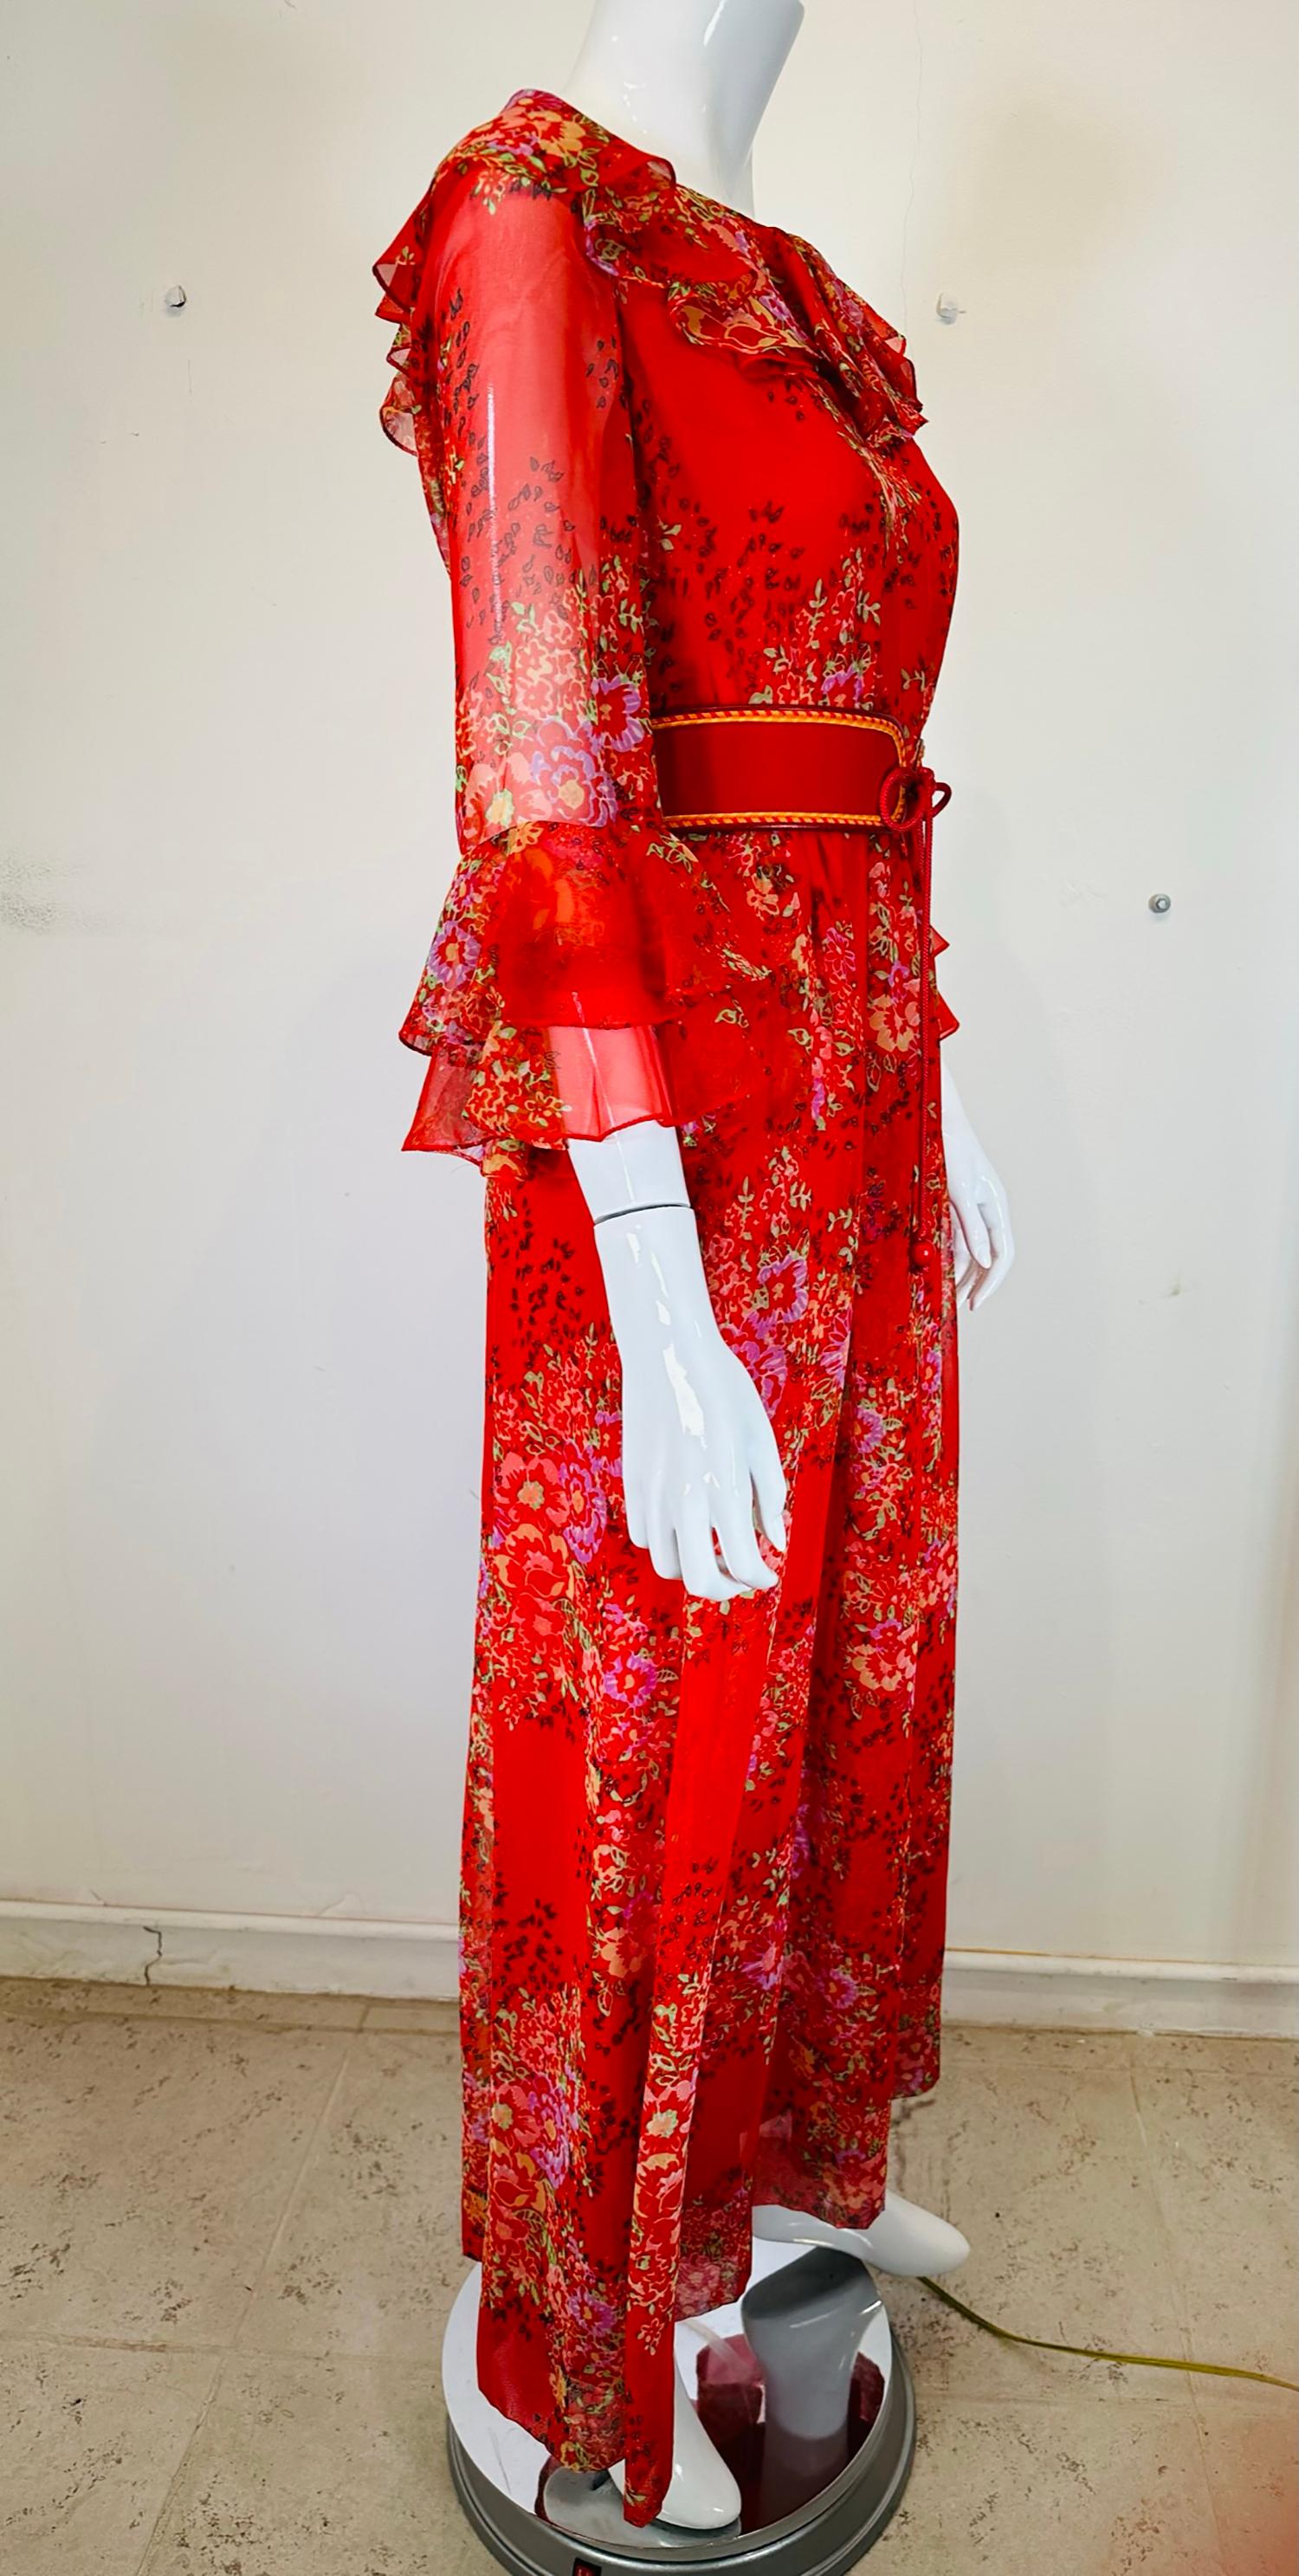 Women's Adele Simpson Red Floral Chiffon Ruffle Neckline Maxi Dress From the 1970s For Sale